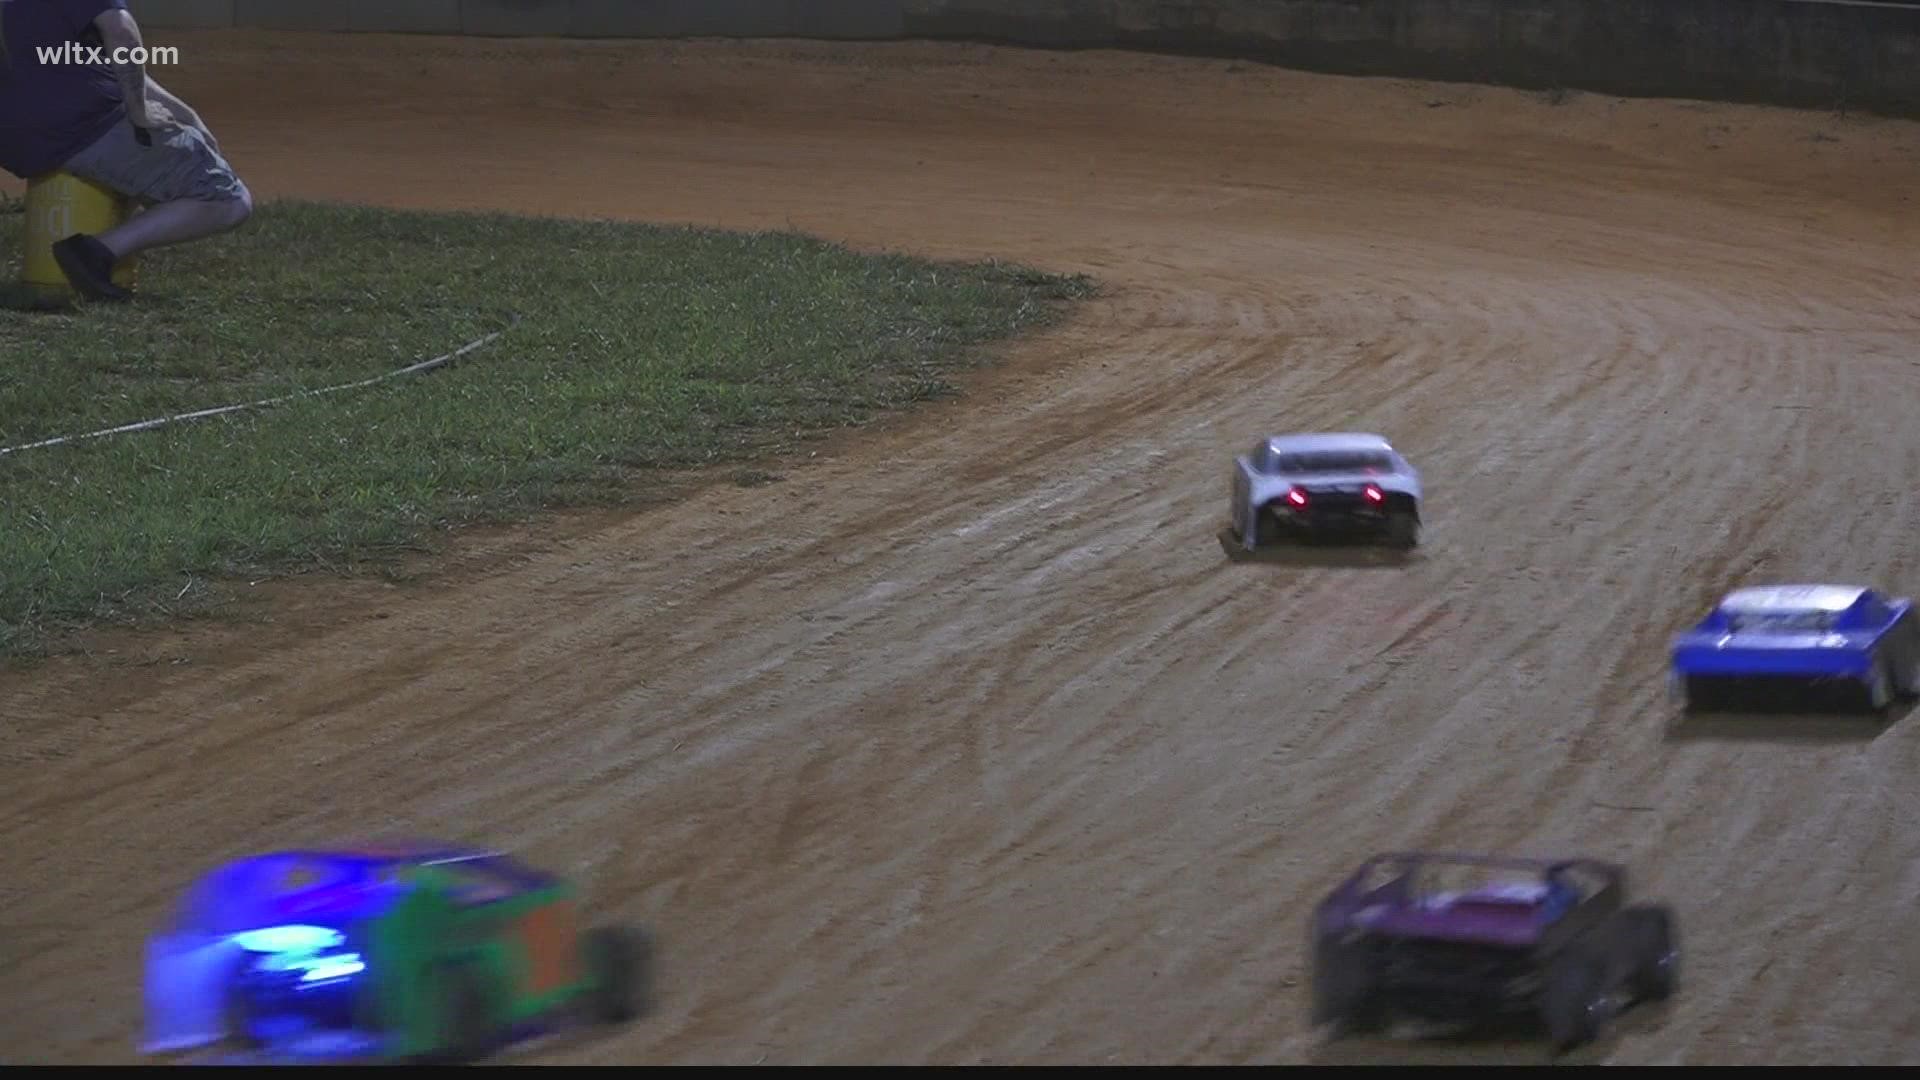 Under the Friday night lights in Sumter, a different kind of racer finds their speed.